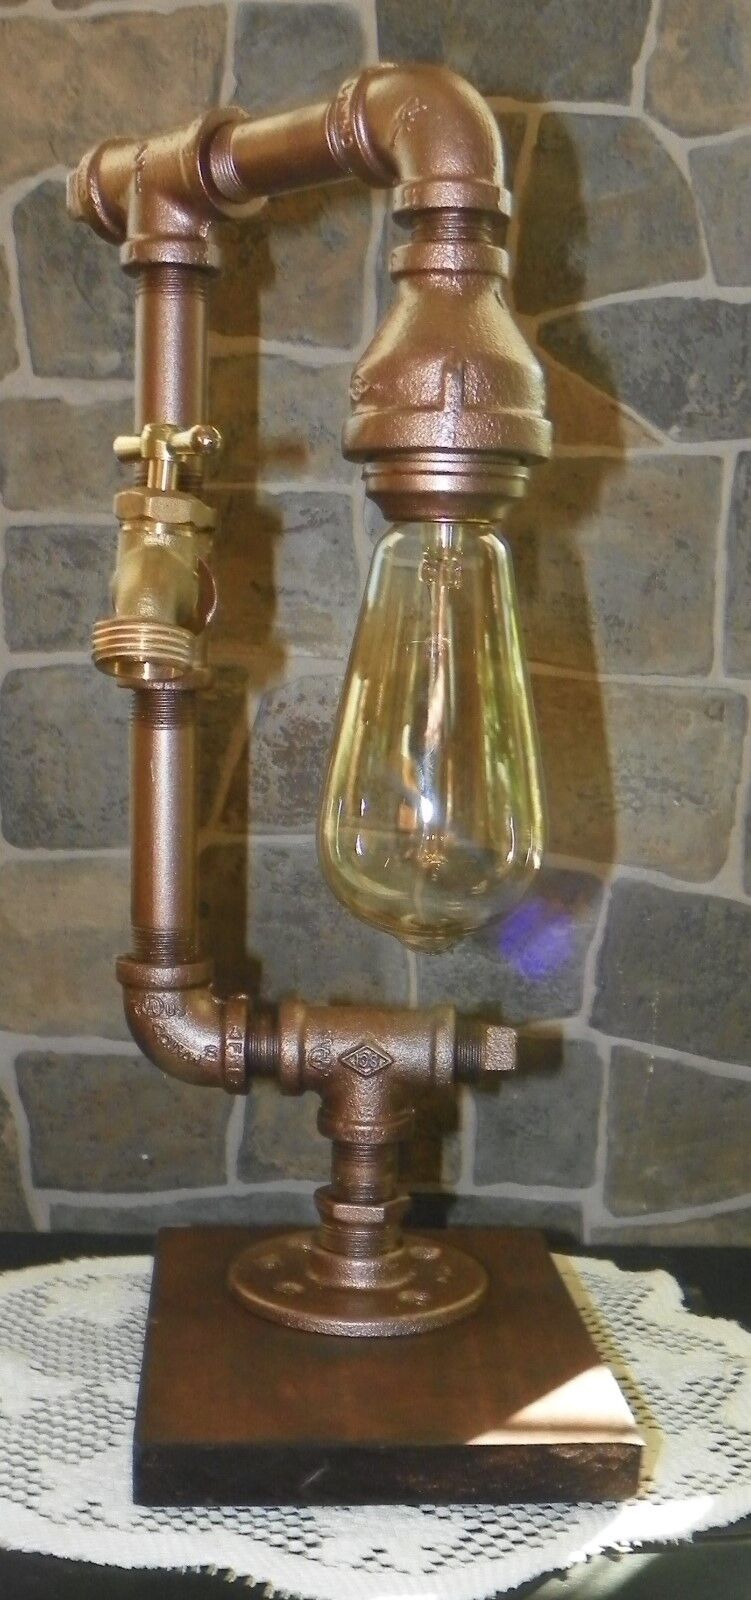  Industrial  Steampunk style Pipe desk/table Lamp with Water Spigot/Edison bulb